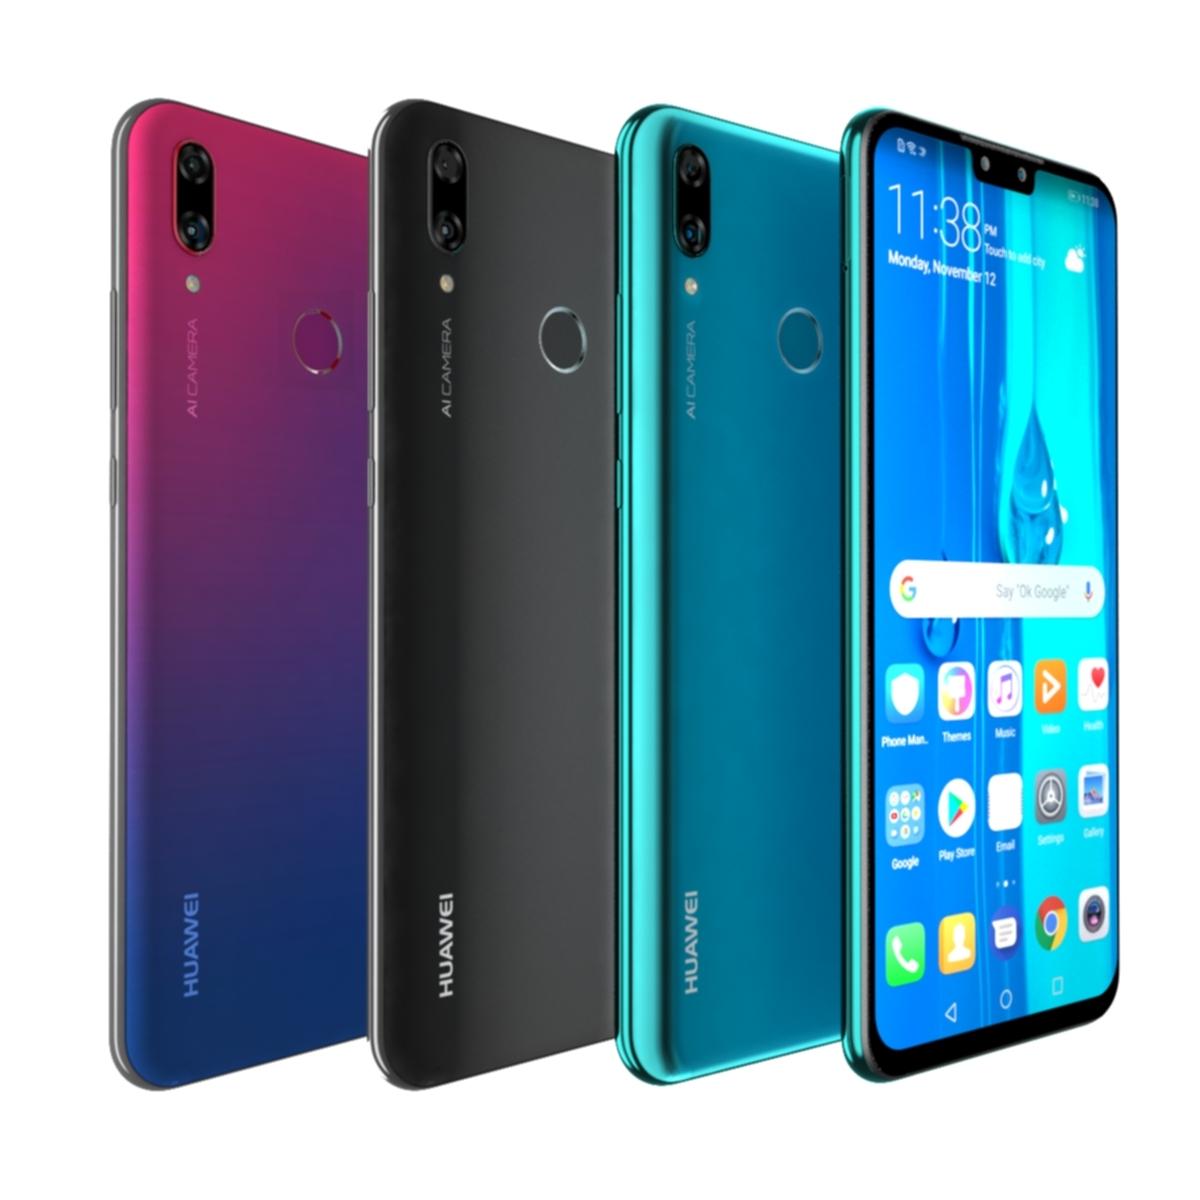 Huawei brings sophistication to smartphone innovation with Y9s